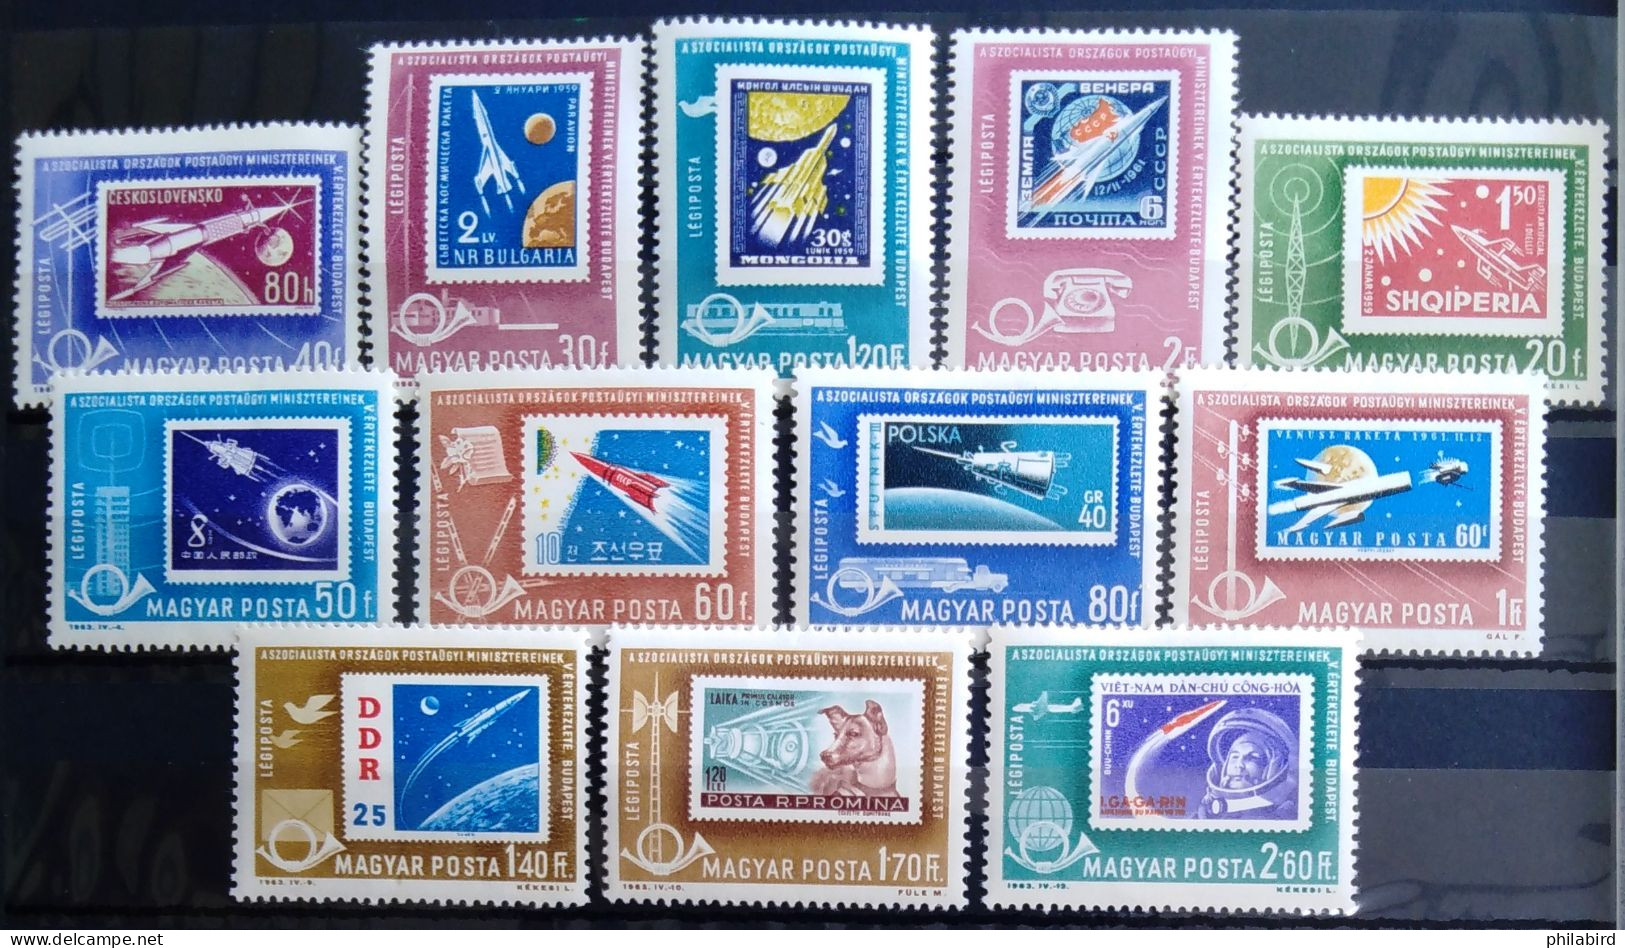 HONGRIE                            P.A  258/269                        NEUF* - Unused Stamps